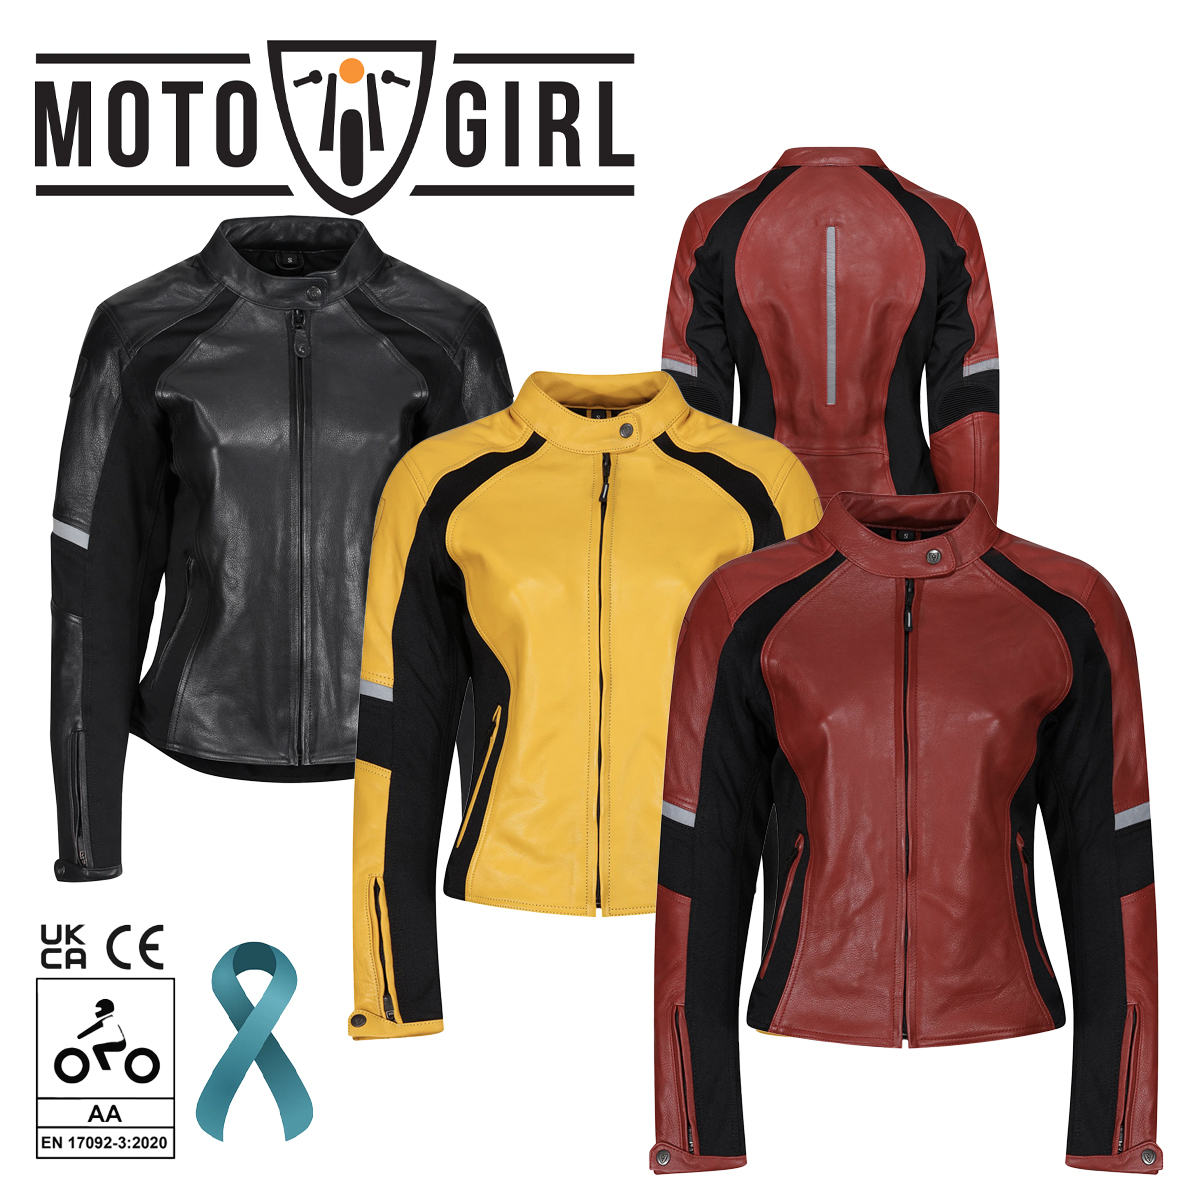 MotoGirl Ladies Motorcycle Clothing, FREE DELIVERY